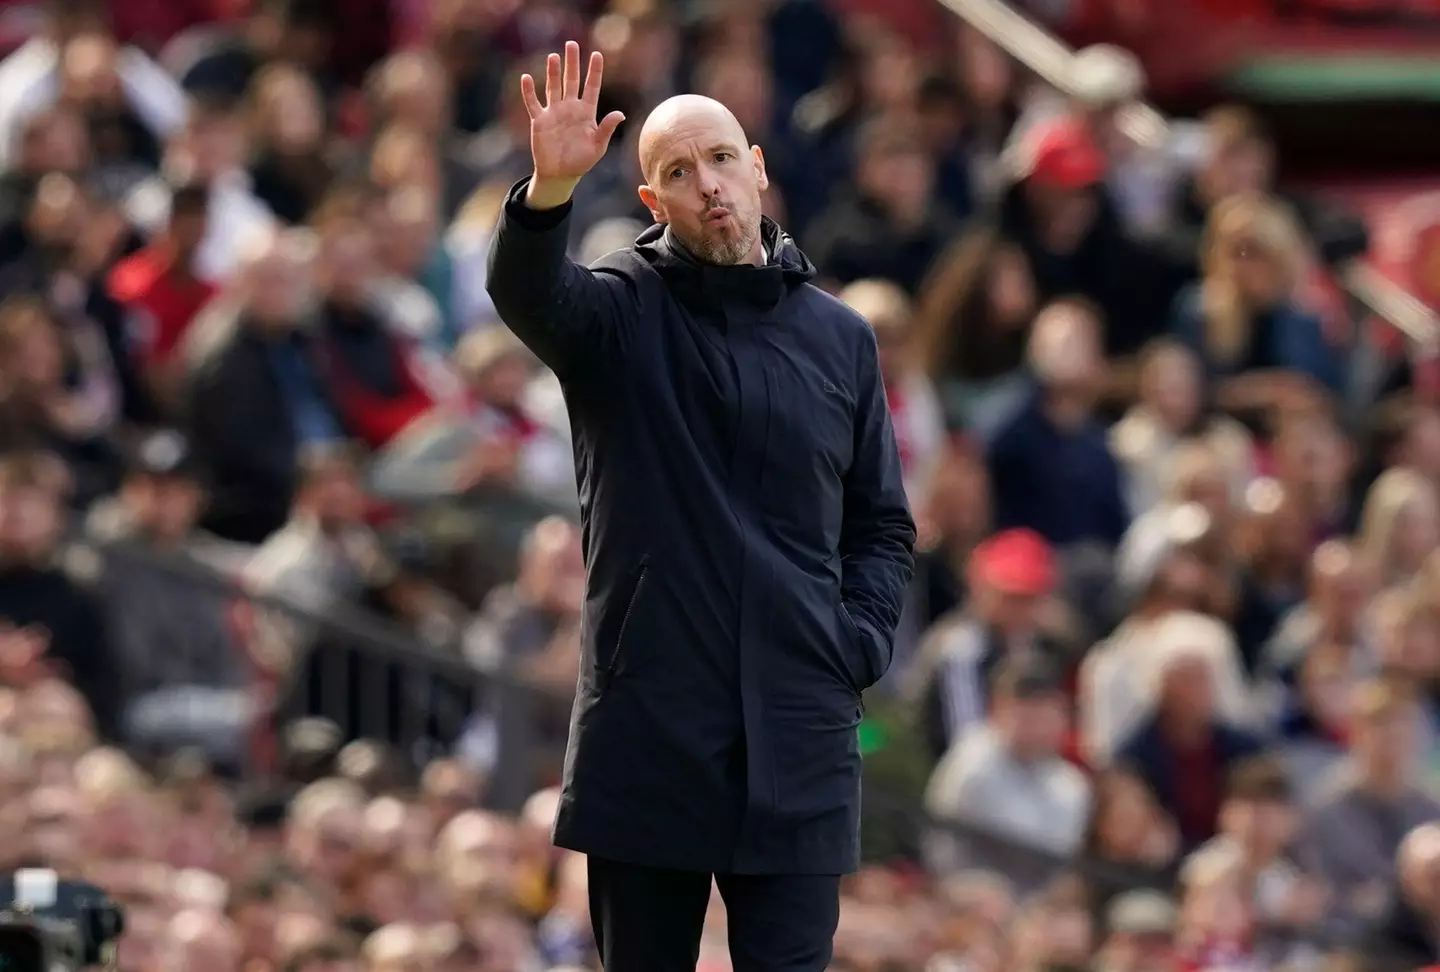 Ten Hag arrived late for the second half. Image: Alamy